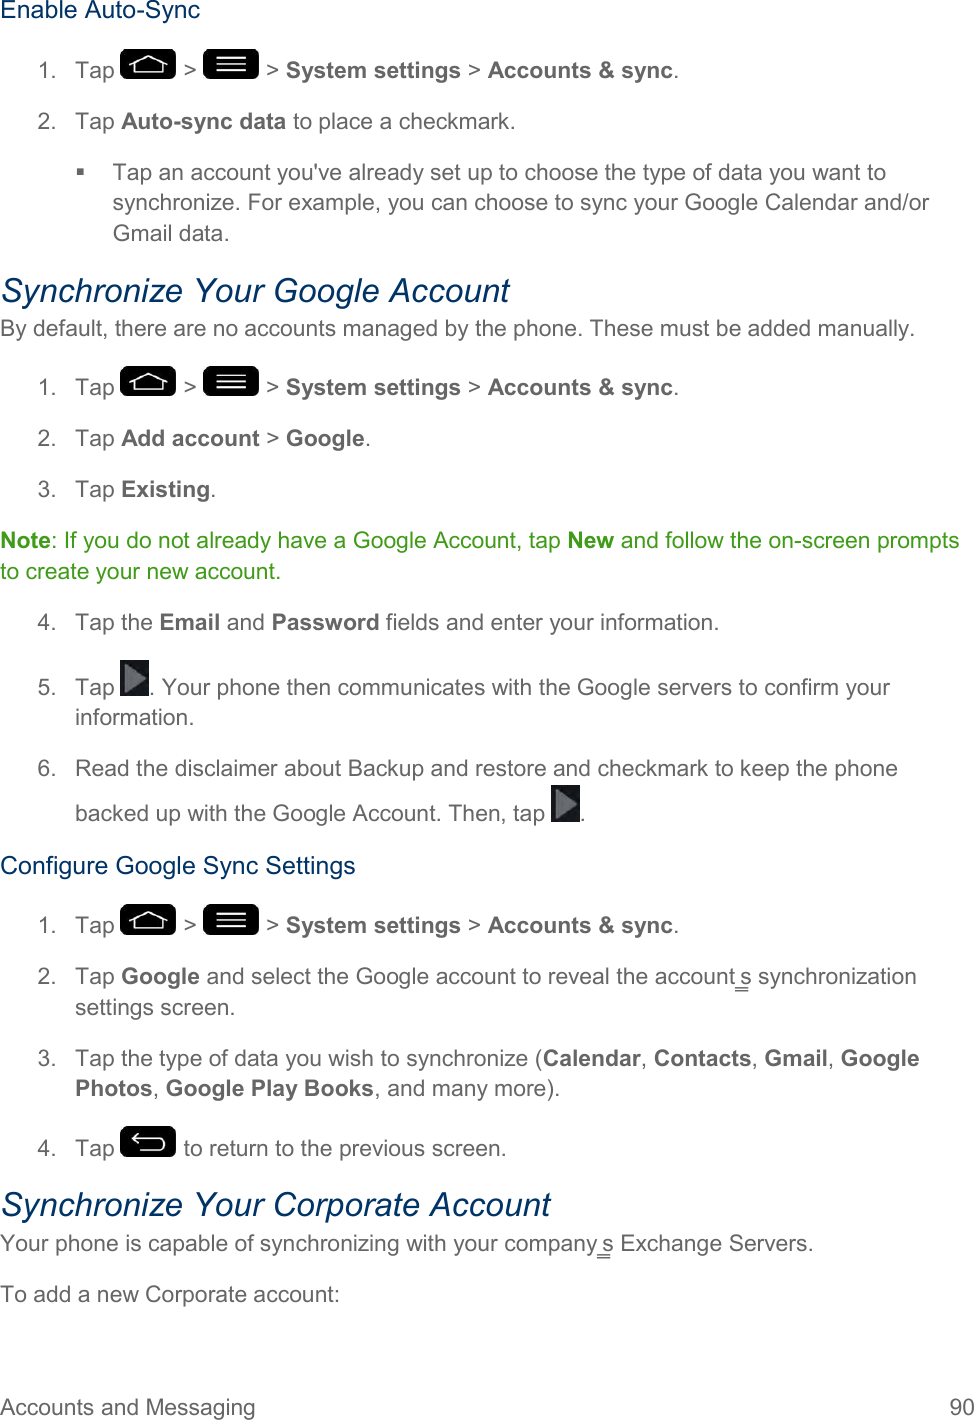 Accounts and Messaging  90 Enable Auto-Sync 1.  Tap   &gt;   &gt; System settings &gt; Accounts &amp; sync. 2.  Tap Auto-sync data to place a checkmark.   Tap an account you&apos;ve already set up to choose the type of data you want to synchronize. For example, you can choose to sync your Google Calendar and/or Gmail data. Synchronize Your Google Account By default, there are no accounts managed by the phone. These must be added manually. 1.  Tap   &gt;   &gt; System settings &gt; Accounts &amp; sync. 2.  Tap Add account &gt; Google. 3.  Tap Existing. Note: If you do not already have a Google Account, tap New and follow the on-screen prompts to create your new account. 4.  Tap the Email and Password fields and enter your information. 5.  Tap  . Your phone then communicates with the Google servers to confirm your information. 6.  Read the disclaimer about Backup and restore and checkmark to keep the phone backed up with the Google Account. Then, tap  . Configure Google Sync Settings 1.  Tap   &gt;   &gt; System settings &gt; Accounts &amp; sync. 2.  Tap Google and select the Google account to reveal the account‗s synchronization settings screen. 3.  Tap the type of data you wish to synchronize (Calendar, Contacts, Gmail, Google Photos, Google Play Books, and many more). 4.  Tap   to return to the previous screen. Synchronize Your Corporate Account Your phone is capable of synchronizing with your company‗s Exchange Servers. To add a new Corporate account: 